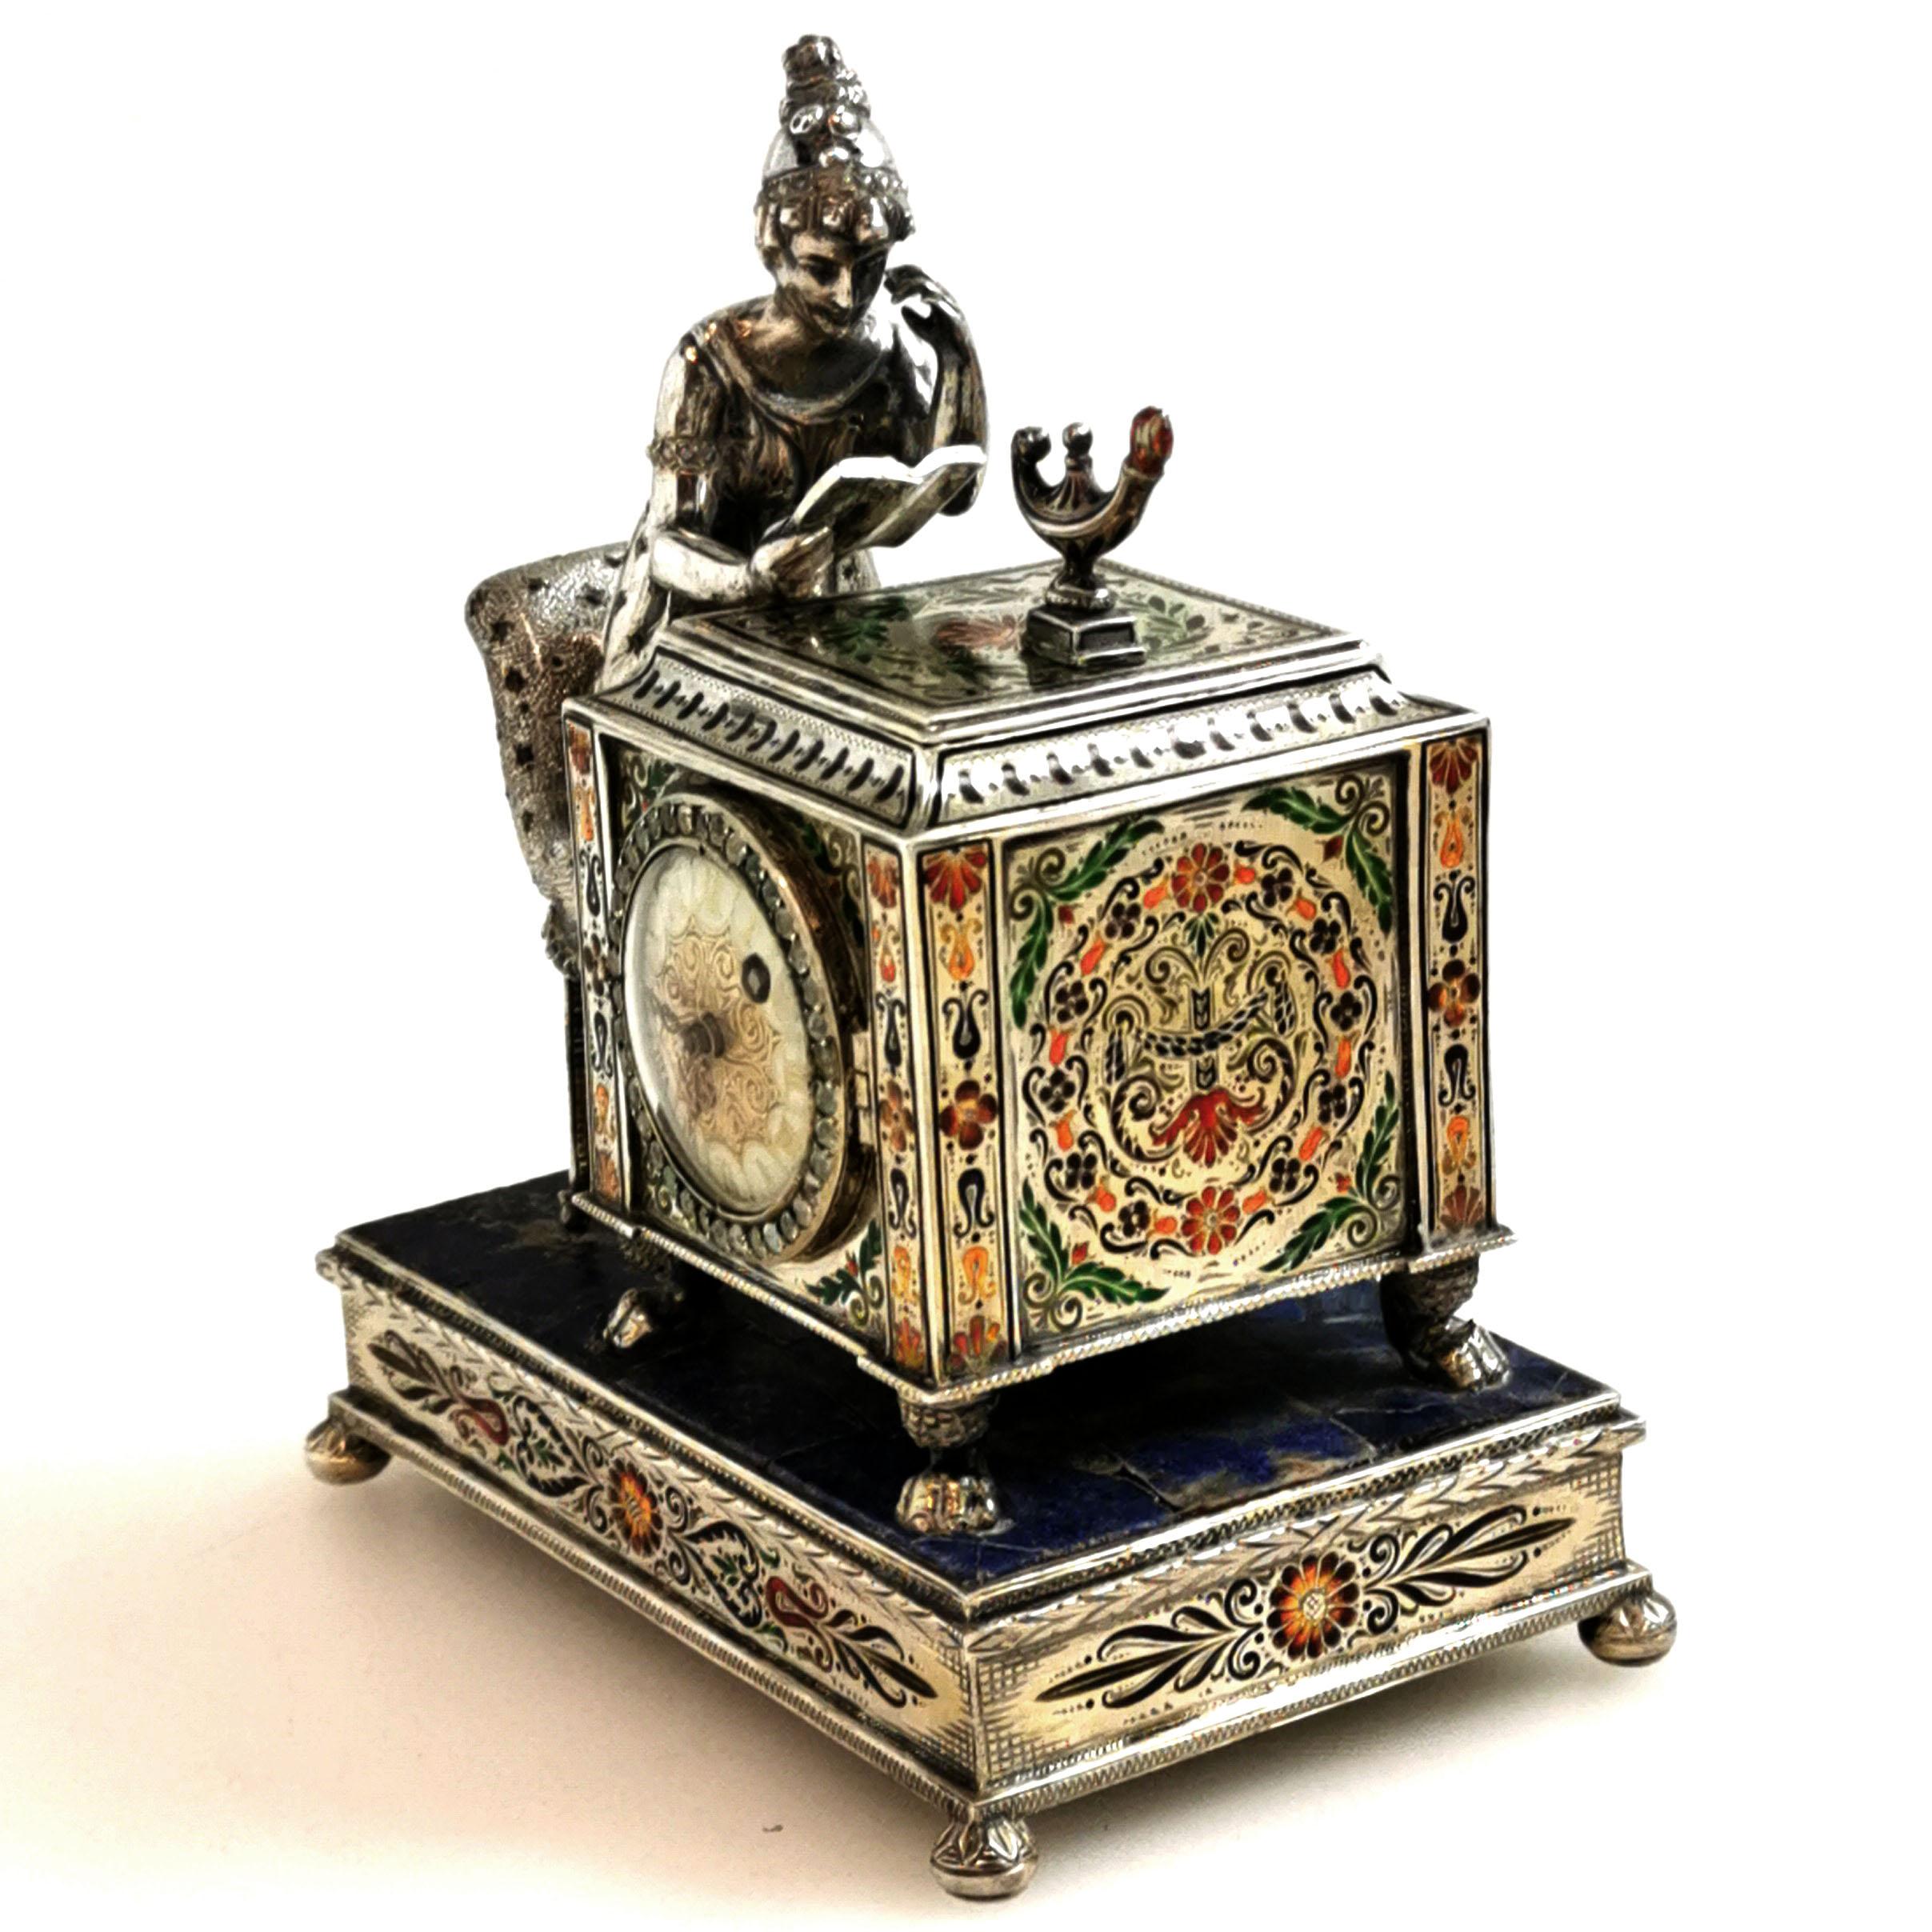 A beautiful Antique Silver and Enamel table reading Clock inset with rubies, sapphires and other gems. The Clock is in the form of a lady in period dress sitting at a desk reading by the light of an oil lamp. The Clock has a silver mounted Lapis